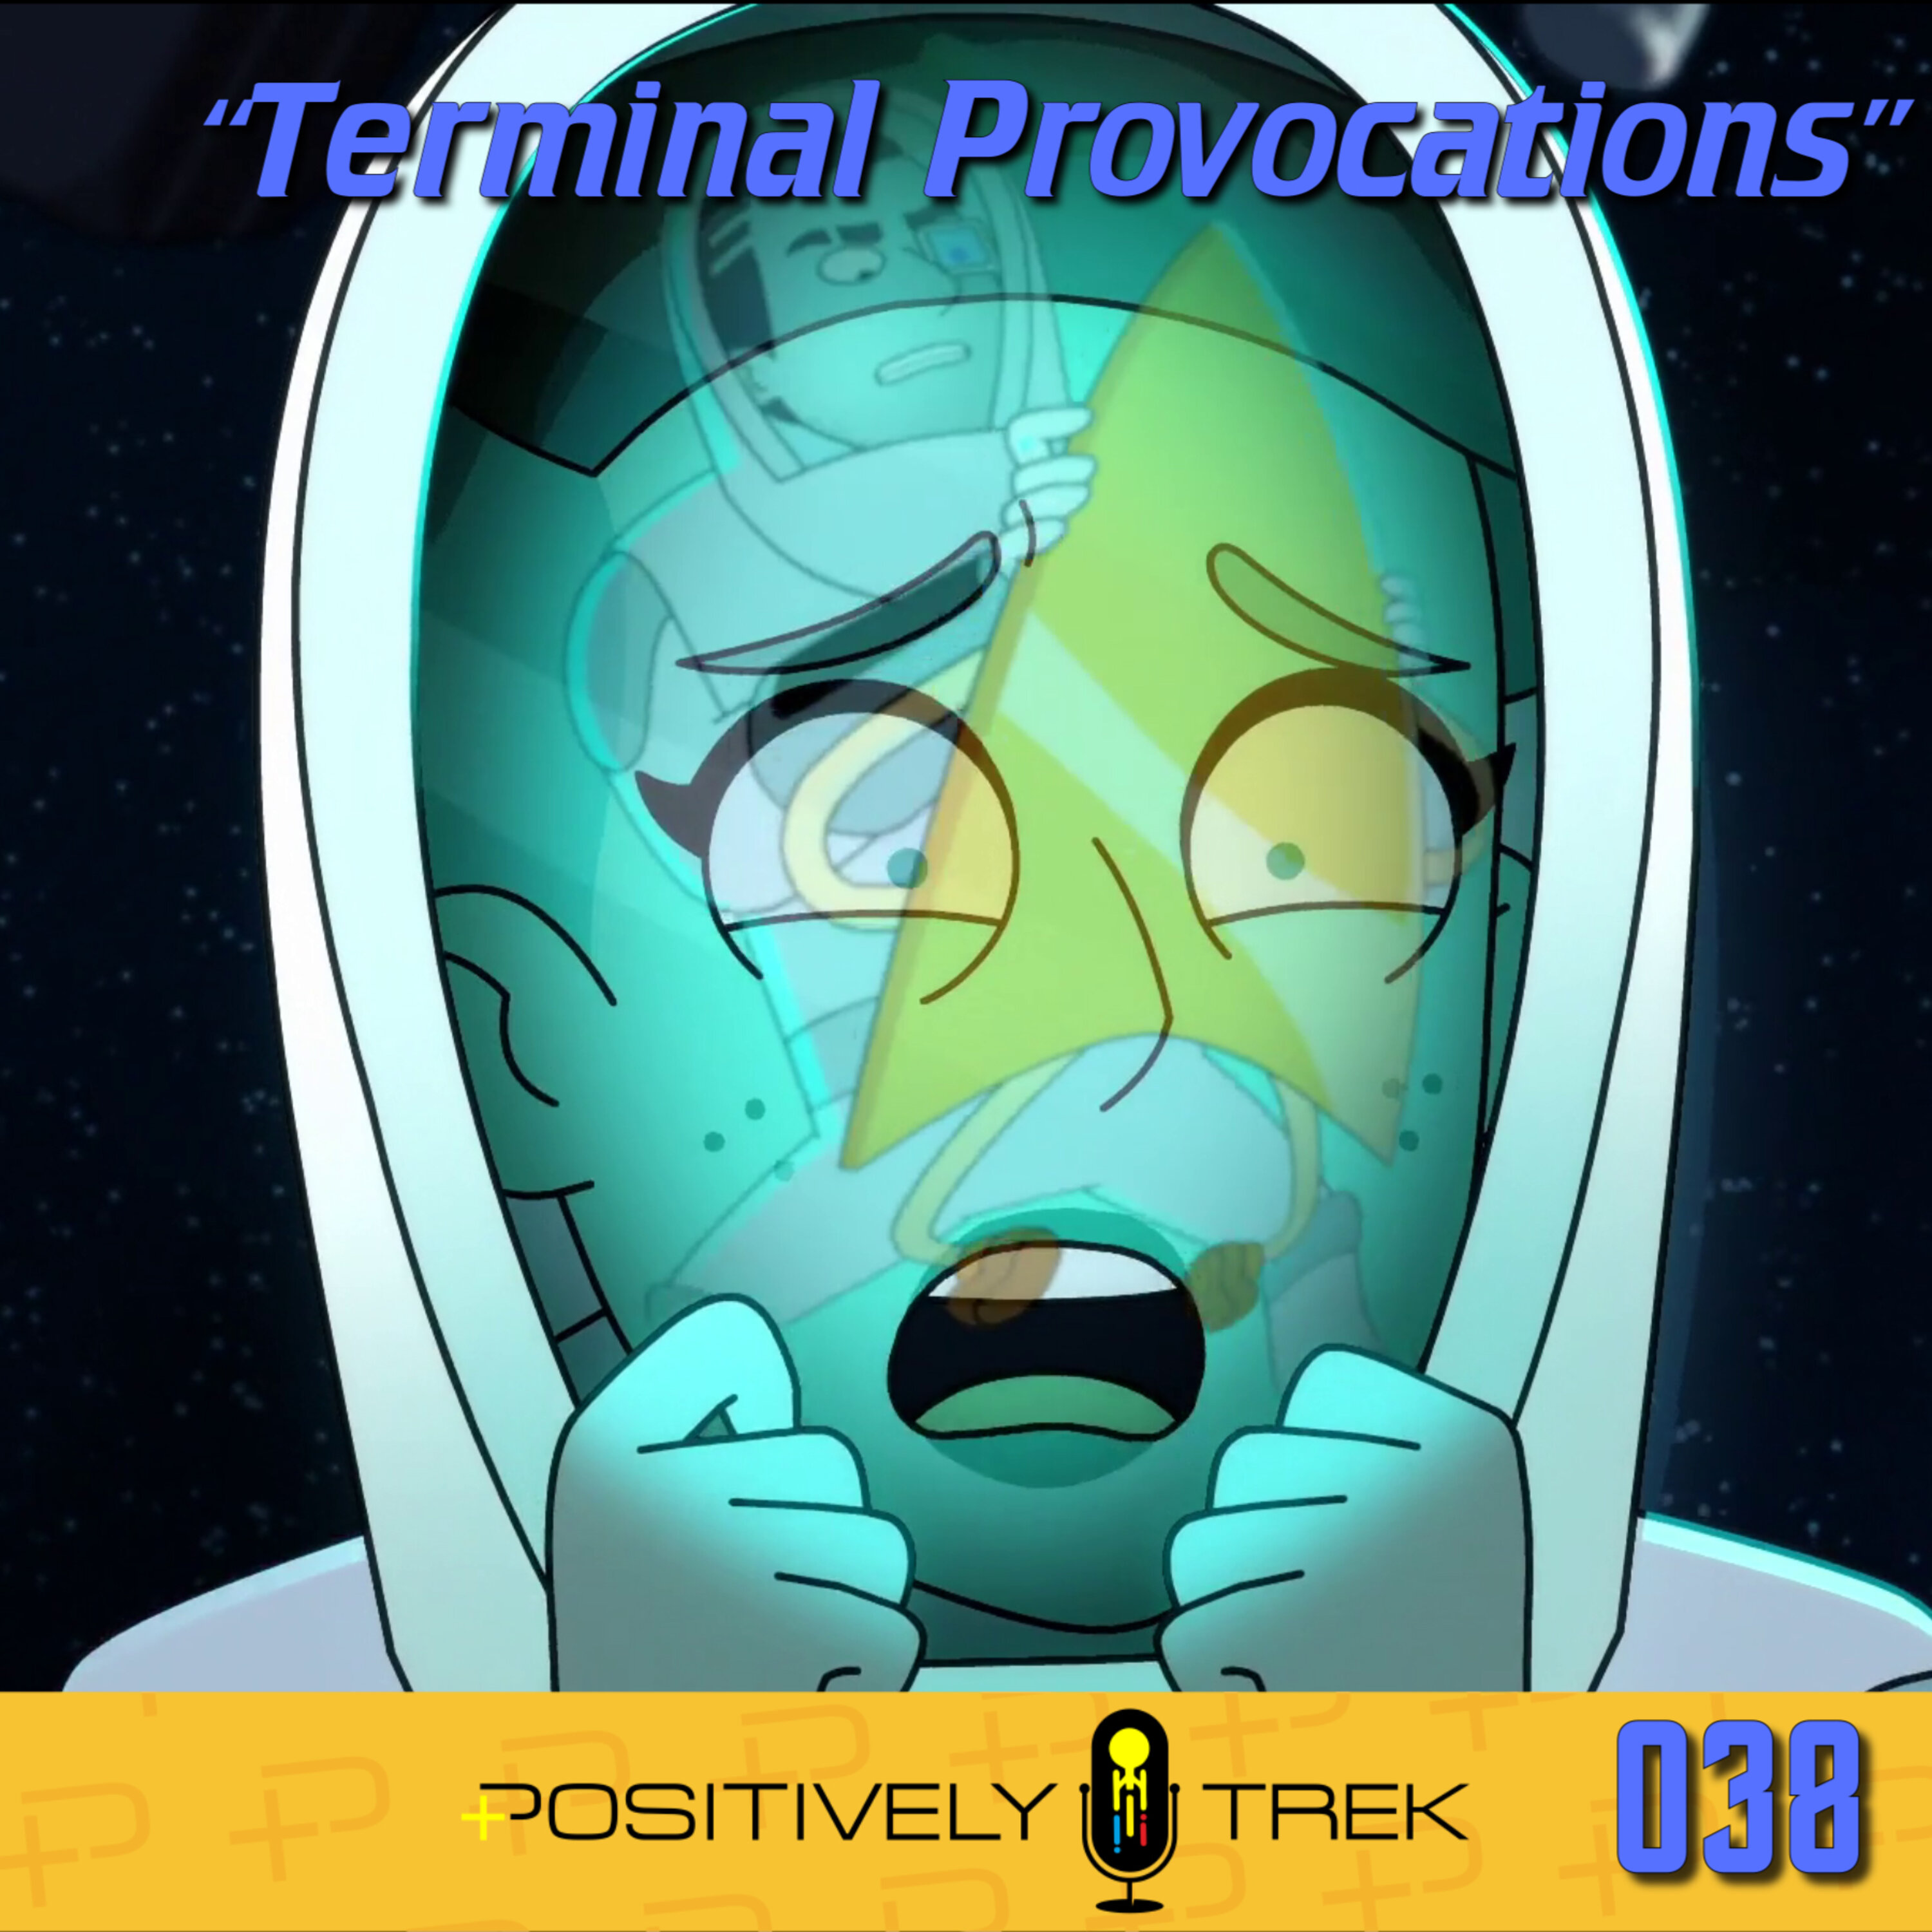 Lower Decks Review: “Terminal Provocations” (1.06)